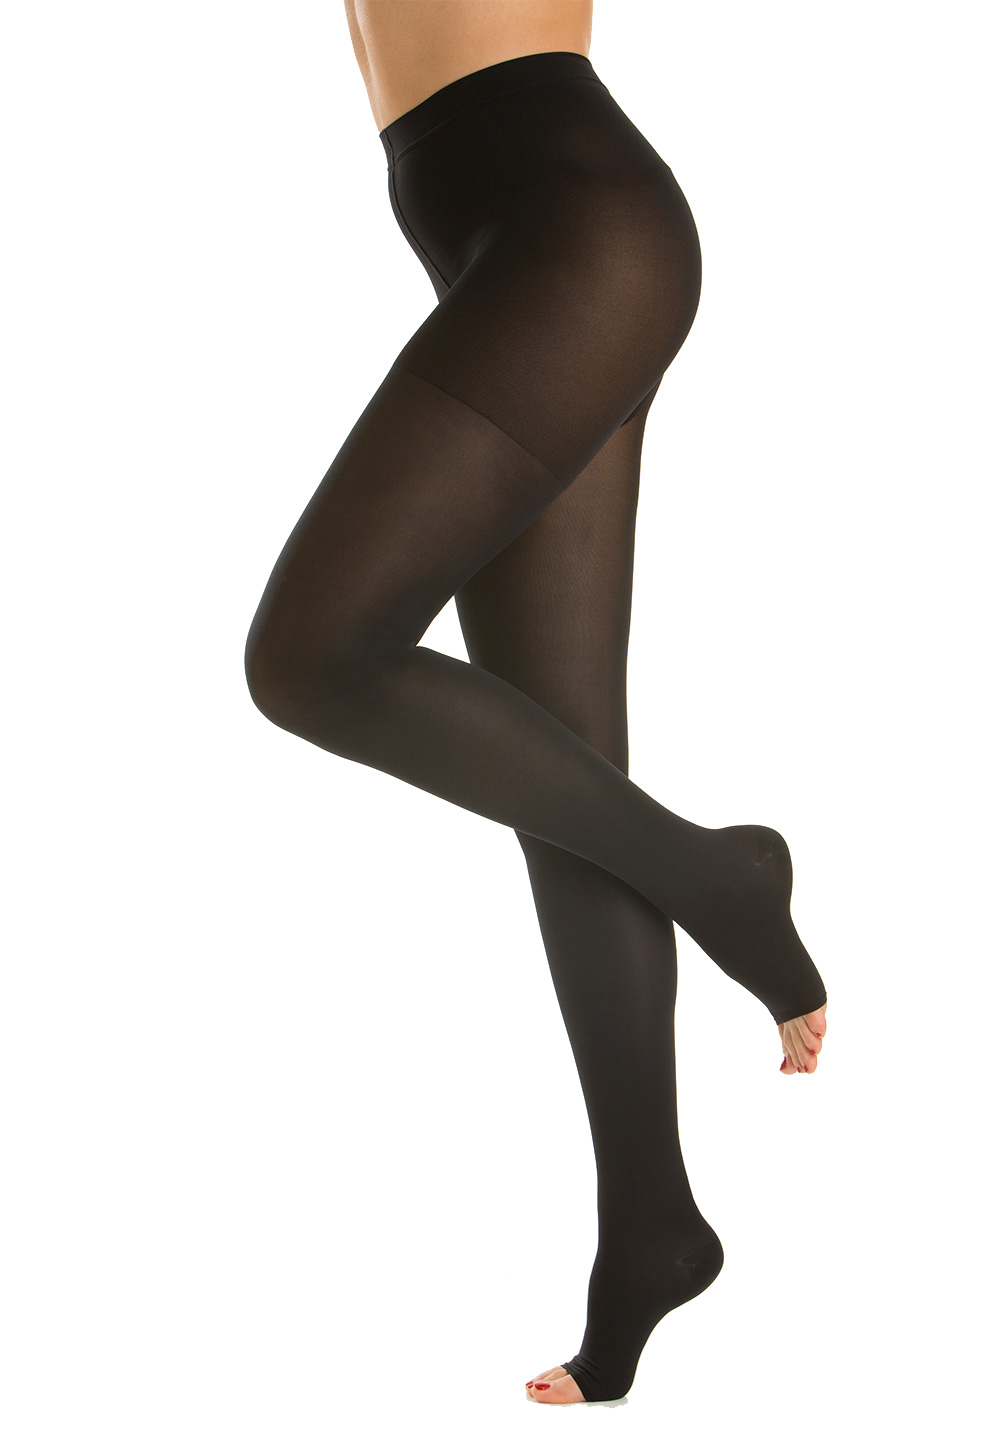 RELAXSAN M2080 (Black 1-S) Cotton medical compression tights (20